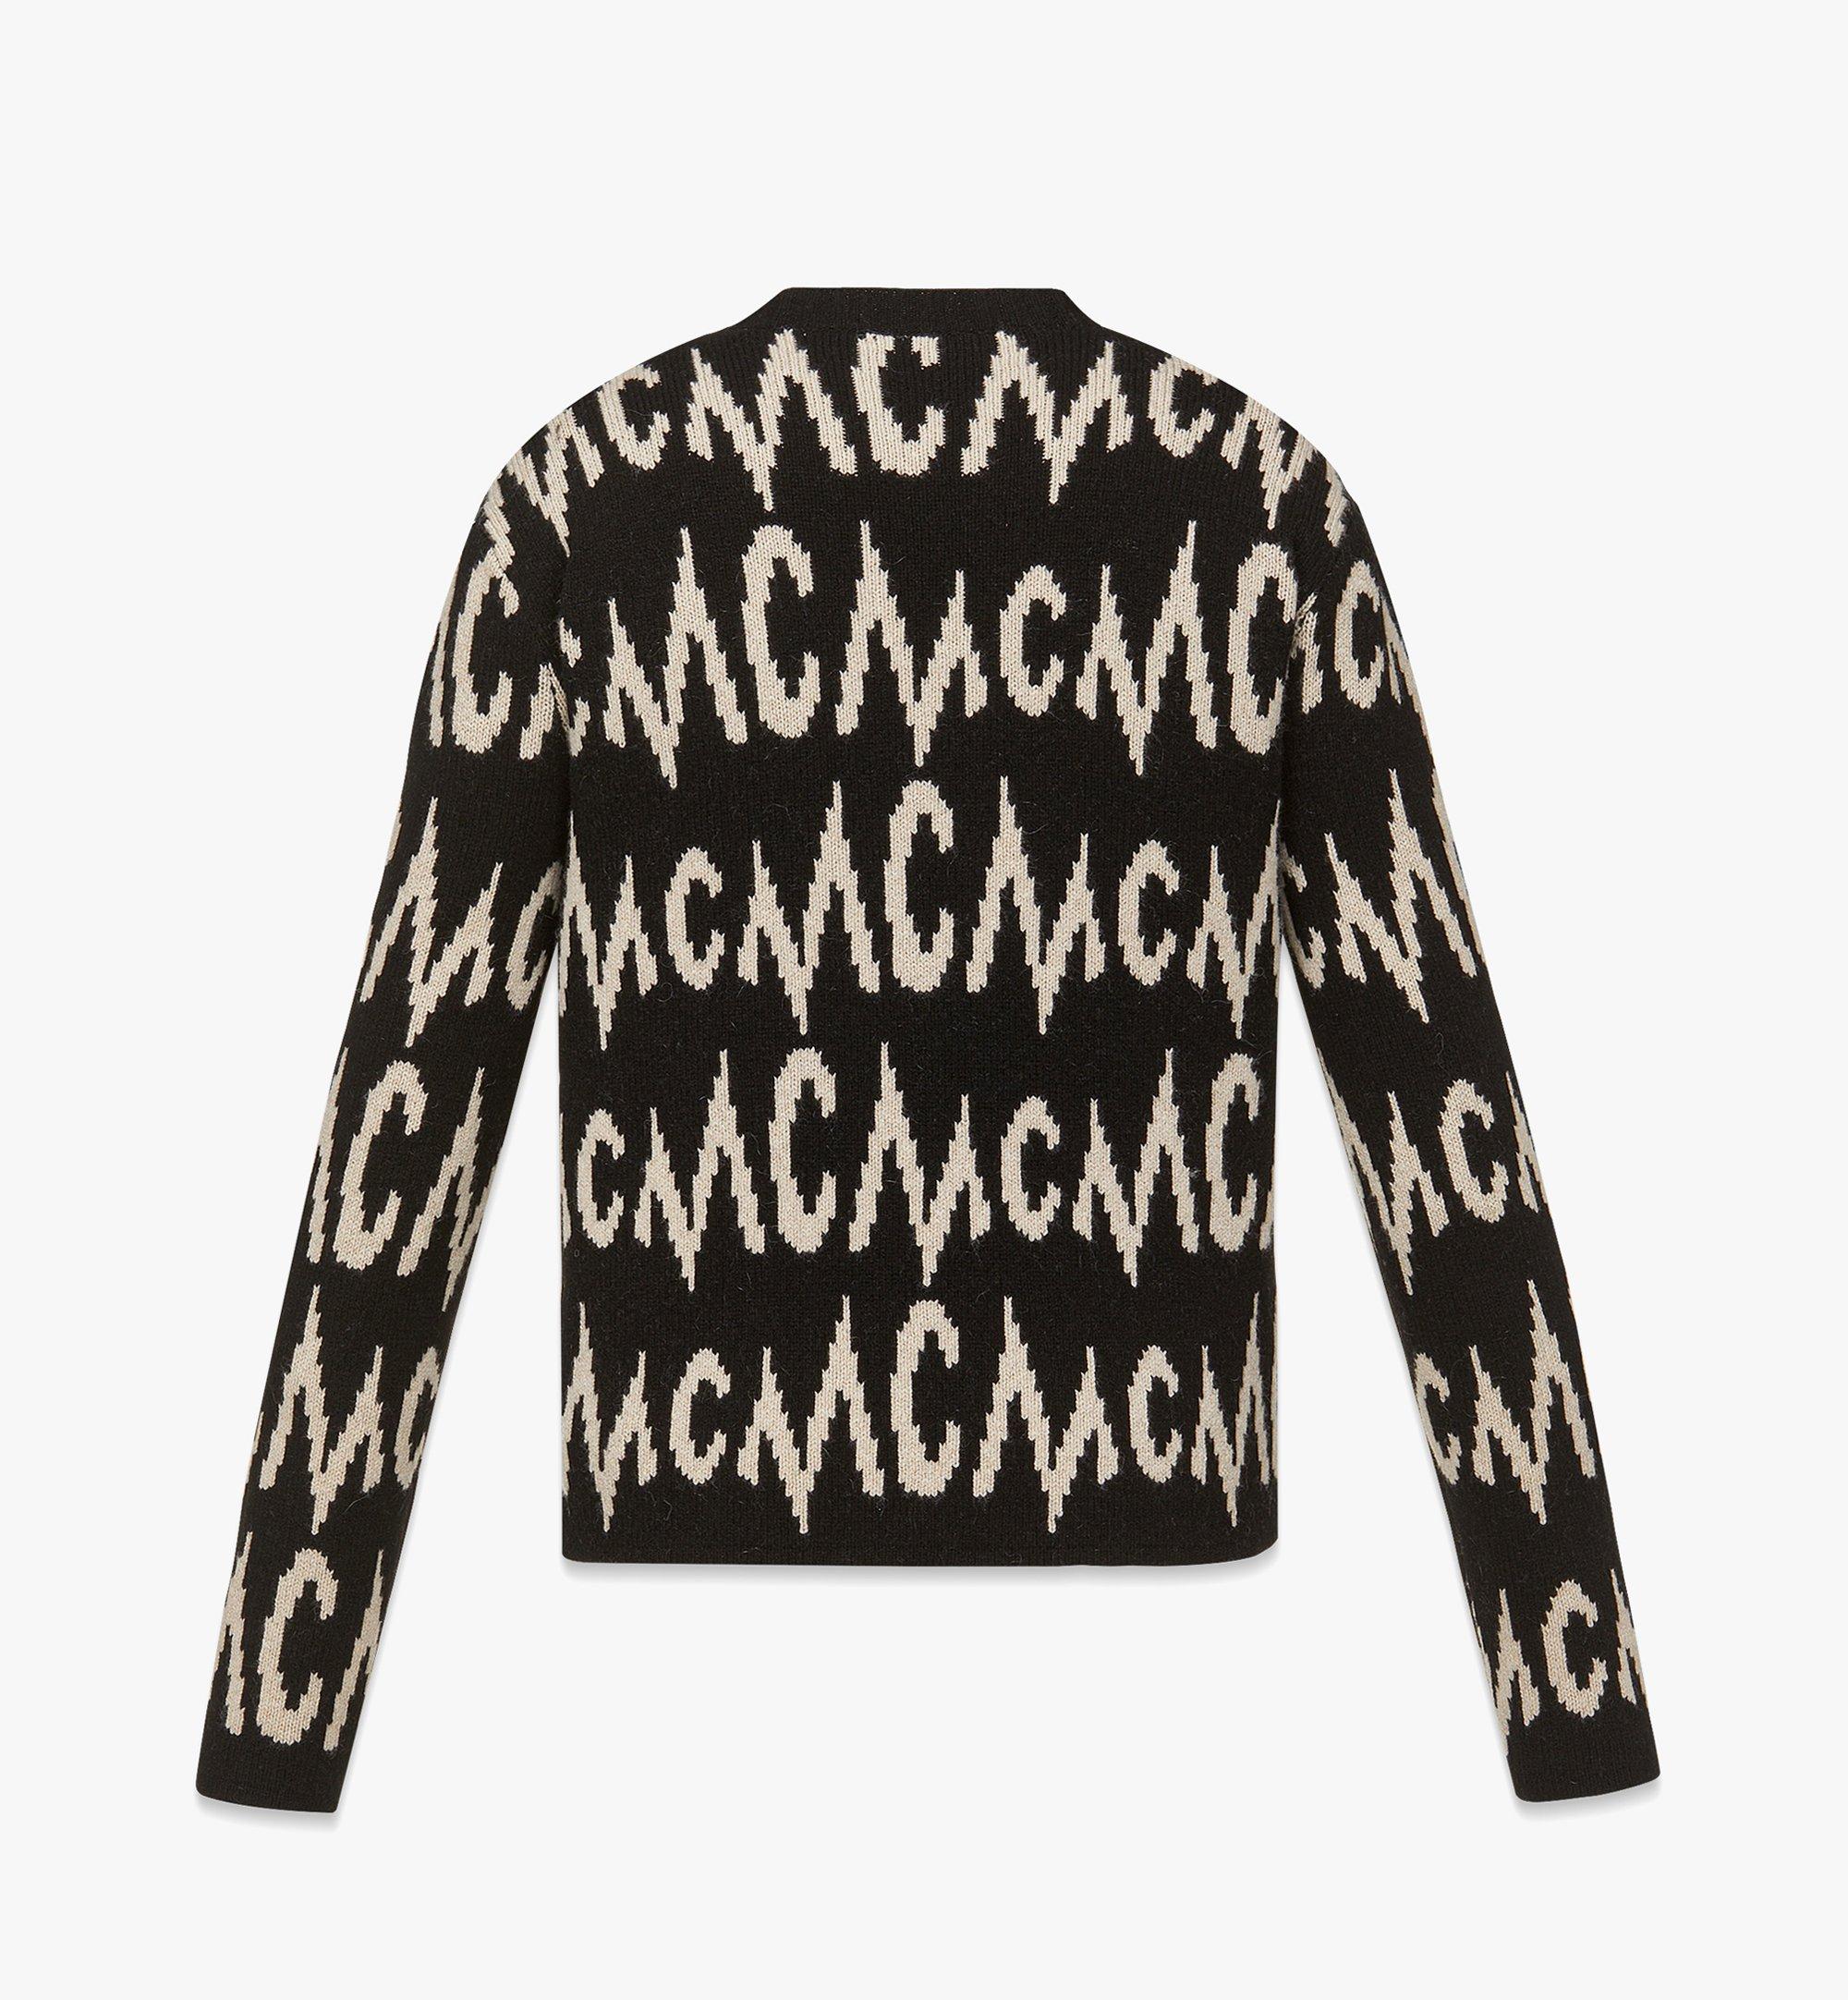 MCM Monogram Jacquard Sweater in Recycled Cashmere Beige MFEDAMM03B900L Alternate View 1